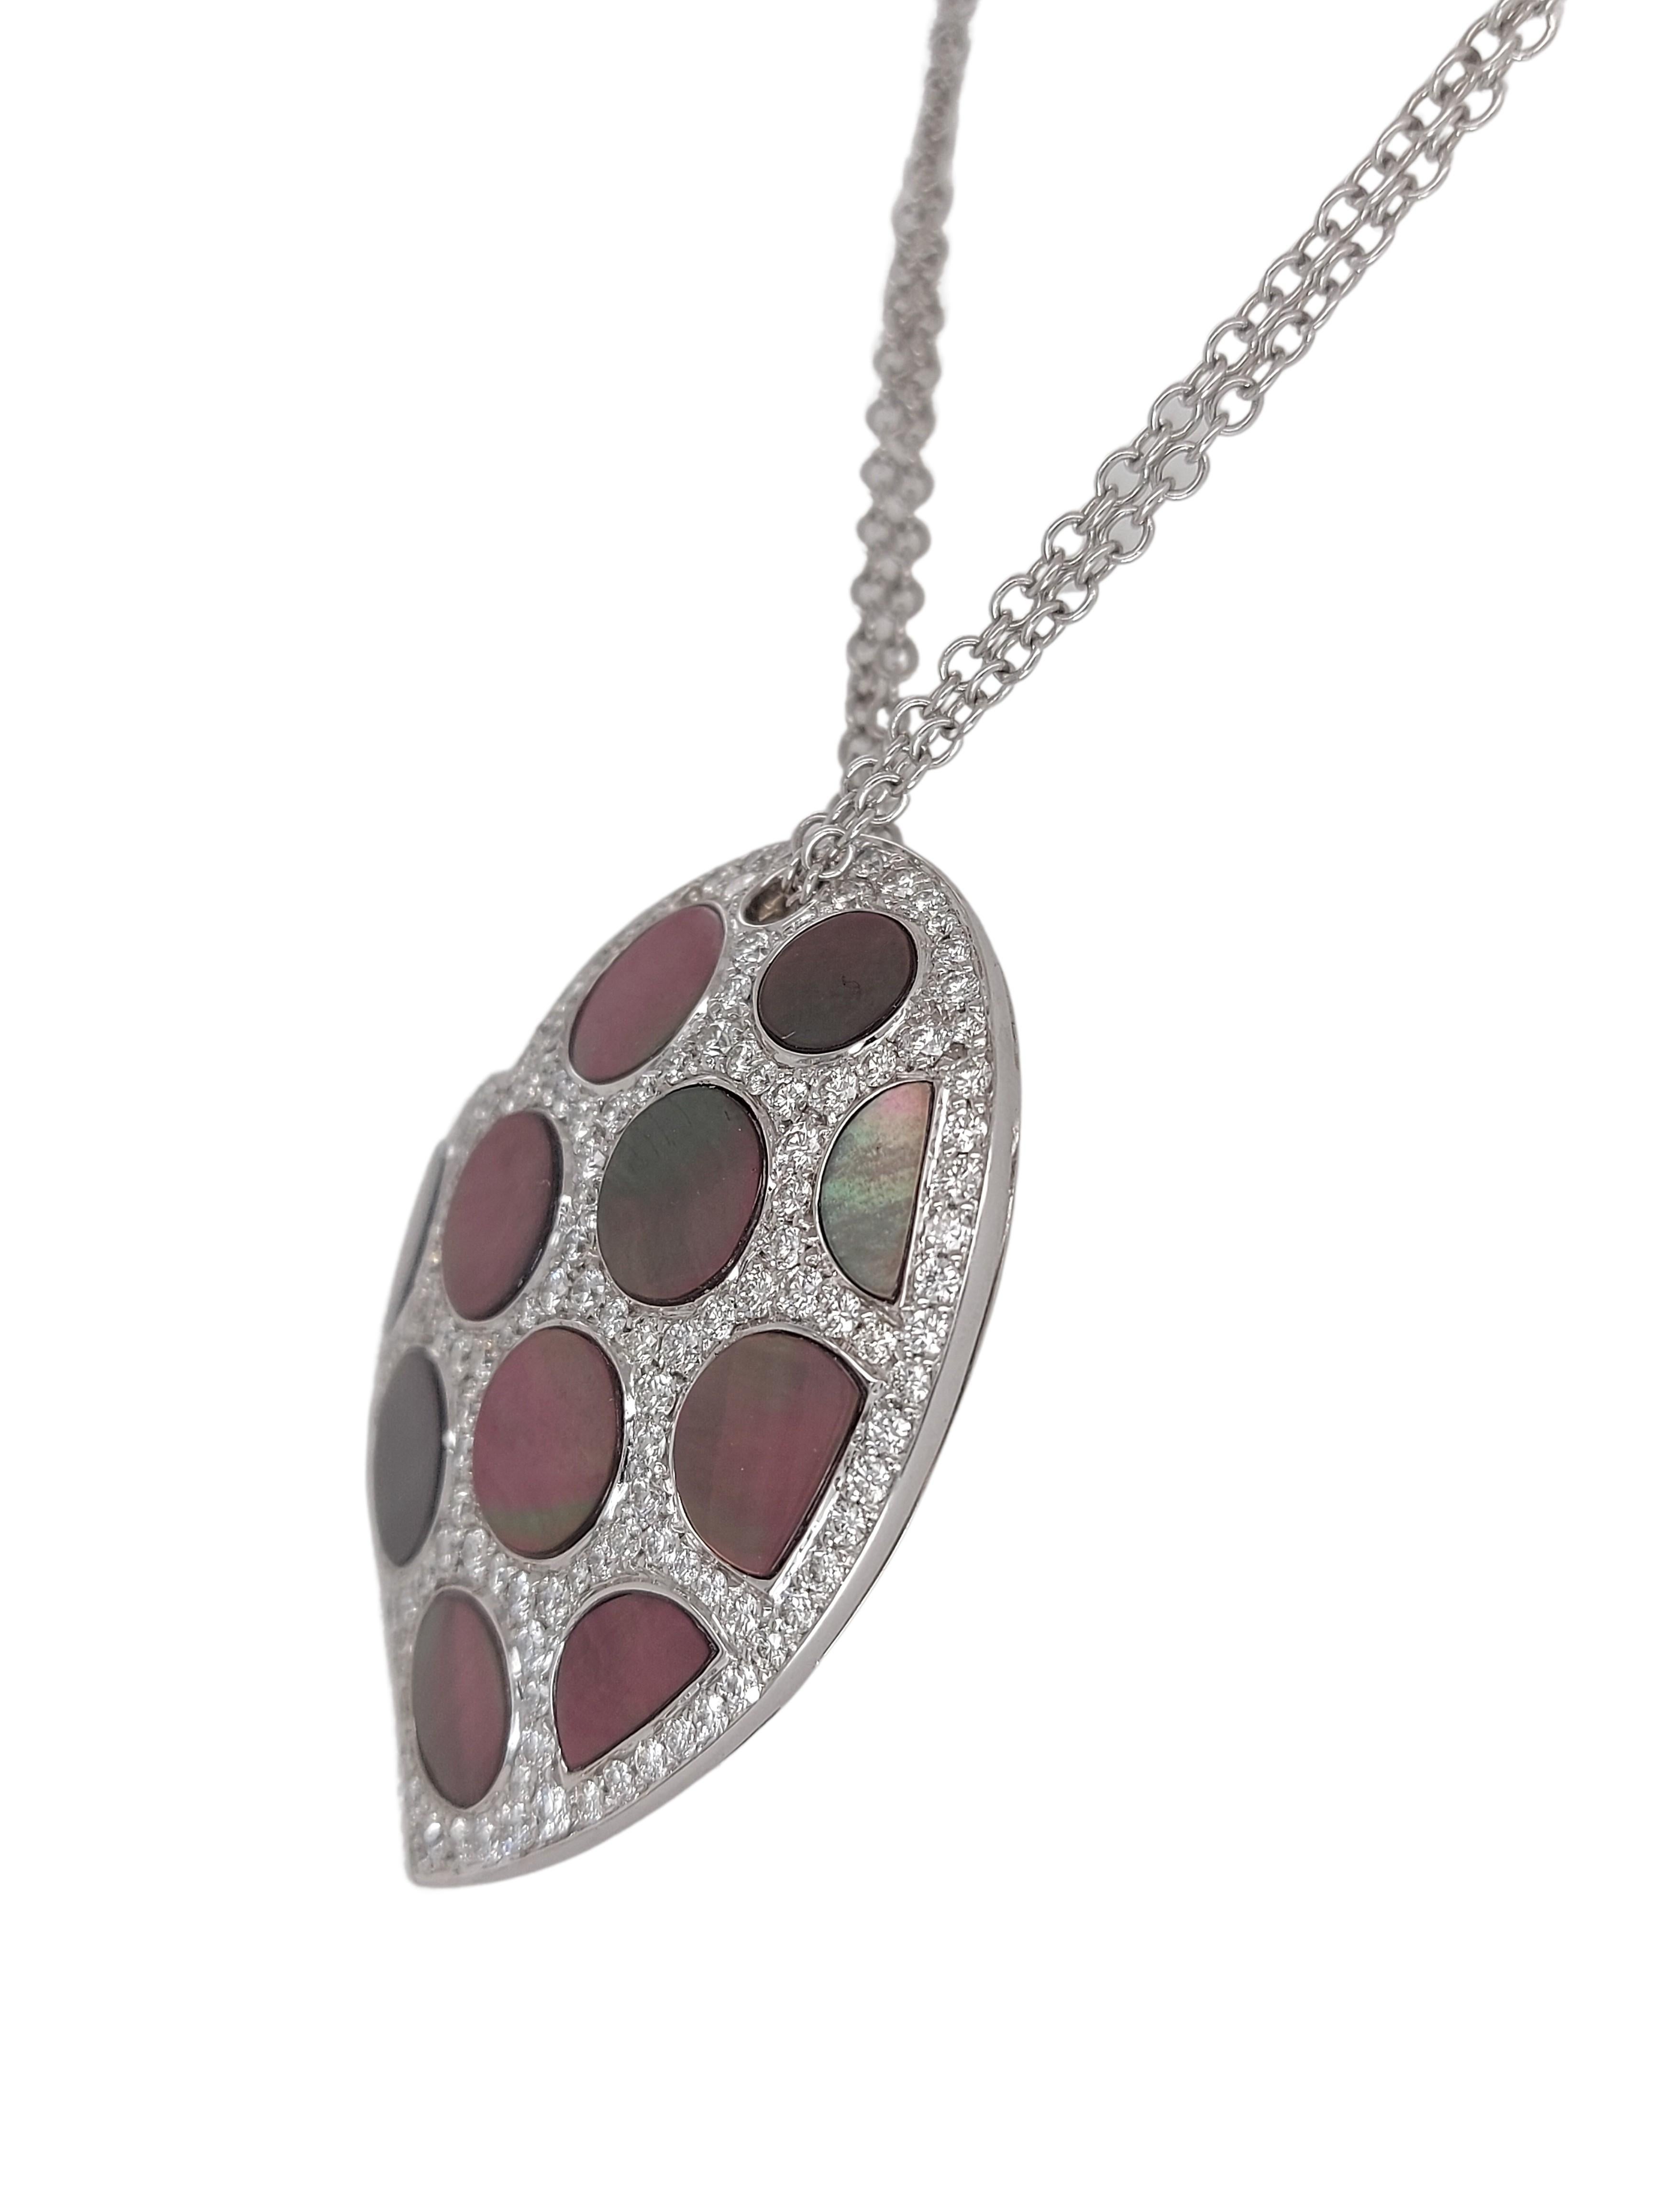 Brilliant Cut Gorgeous 18kt White Gold Diamond Pendant Necklace & Black Mother of Pearl For Sale